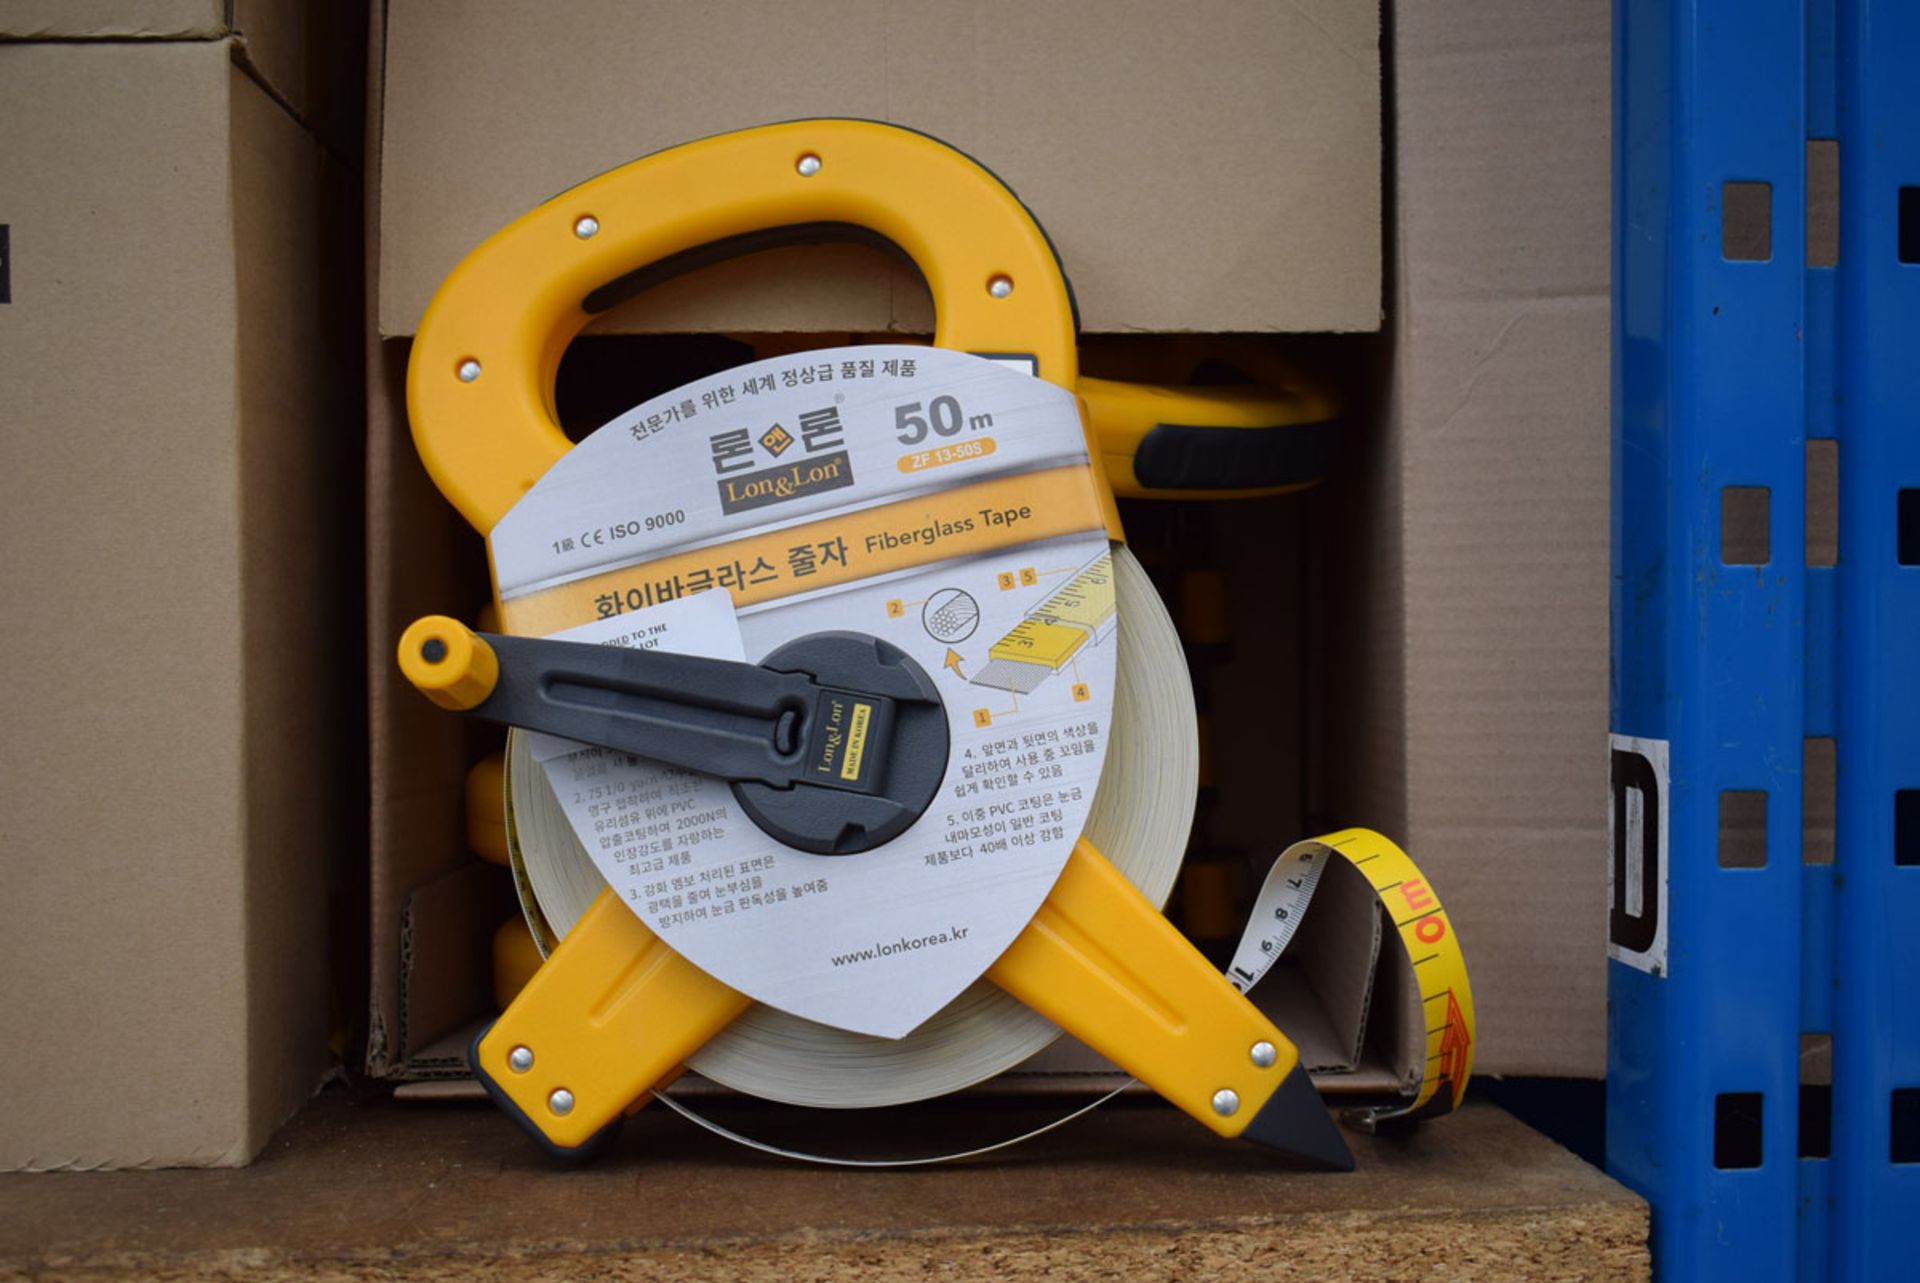 6 x 50m yellow and grey surveyors type tape measures